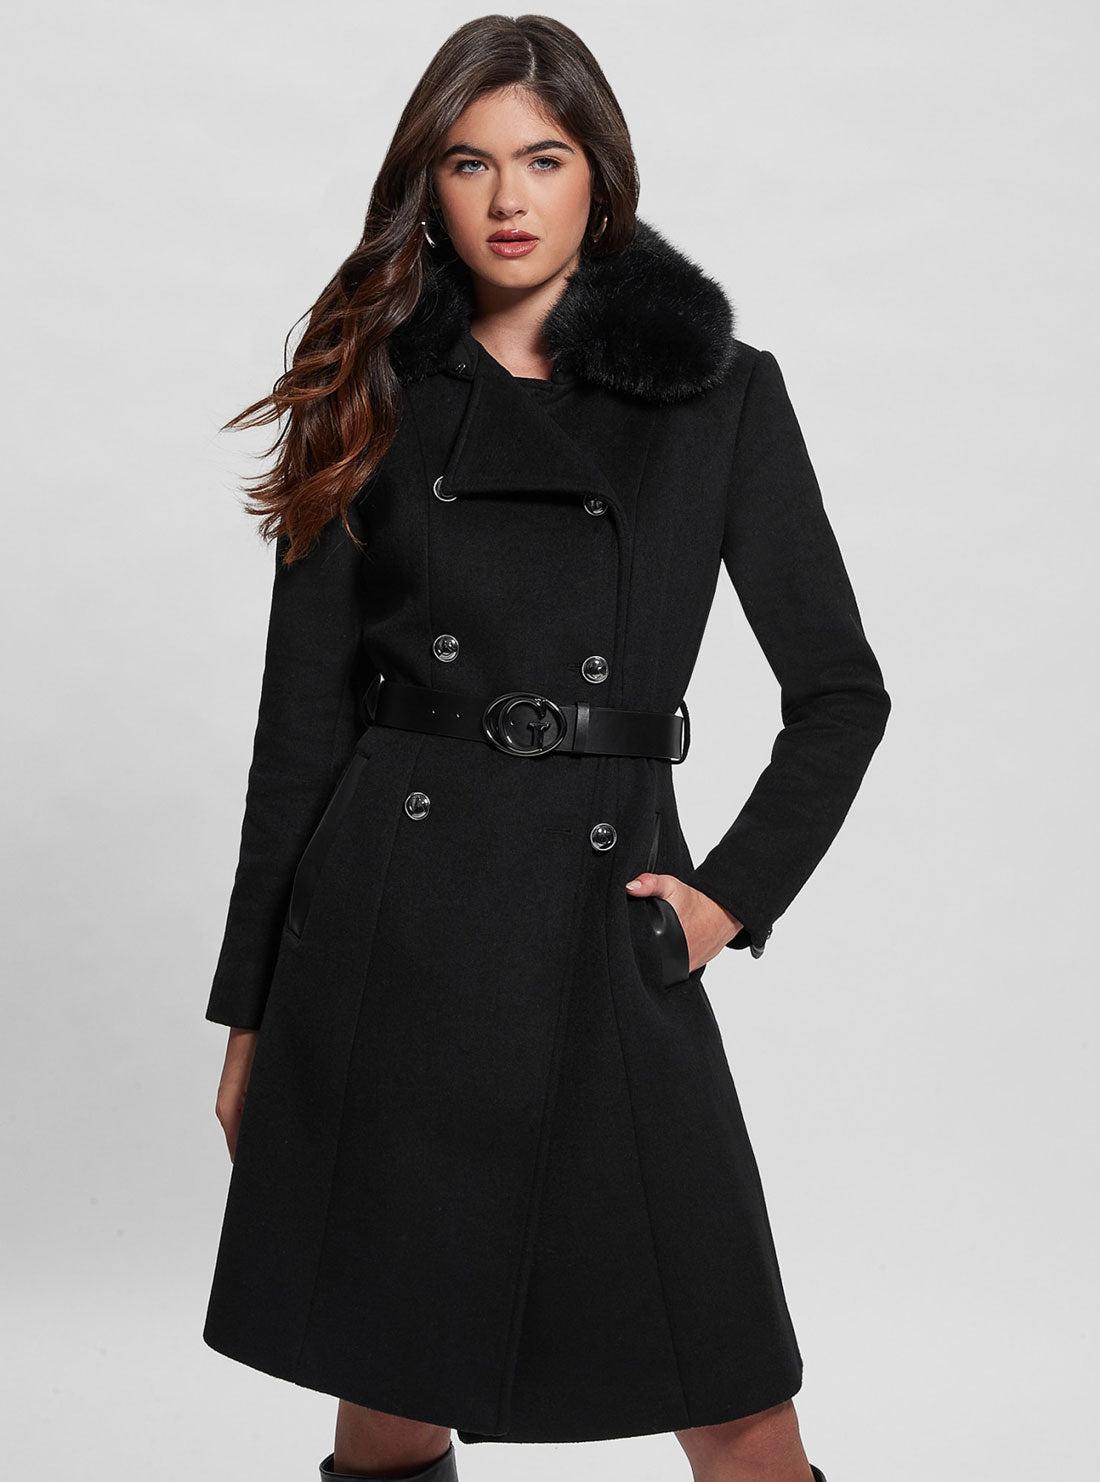 Black Patrice Belted Coat | GUESS Women's Apparel | front view